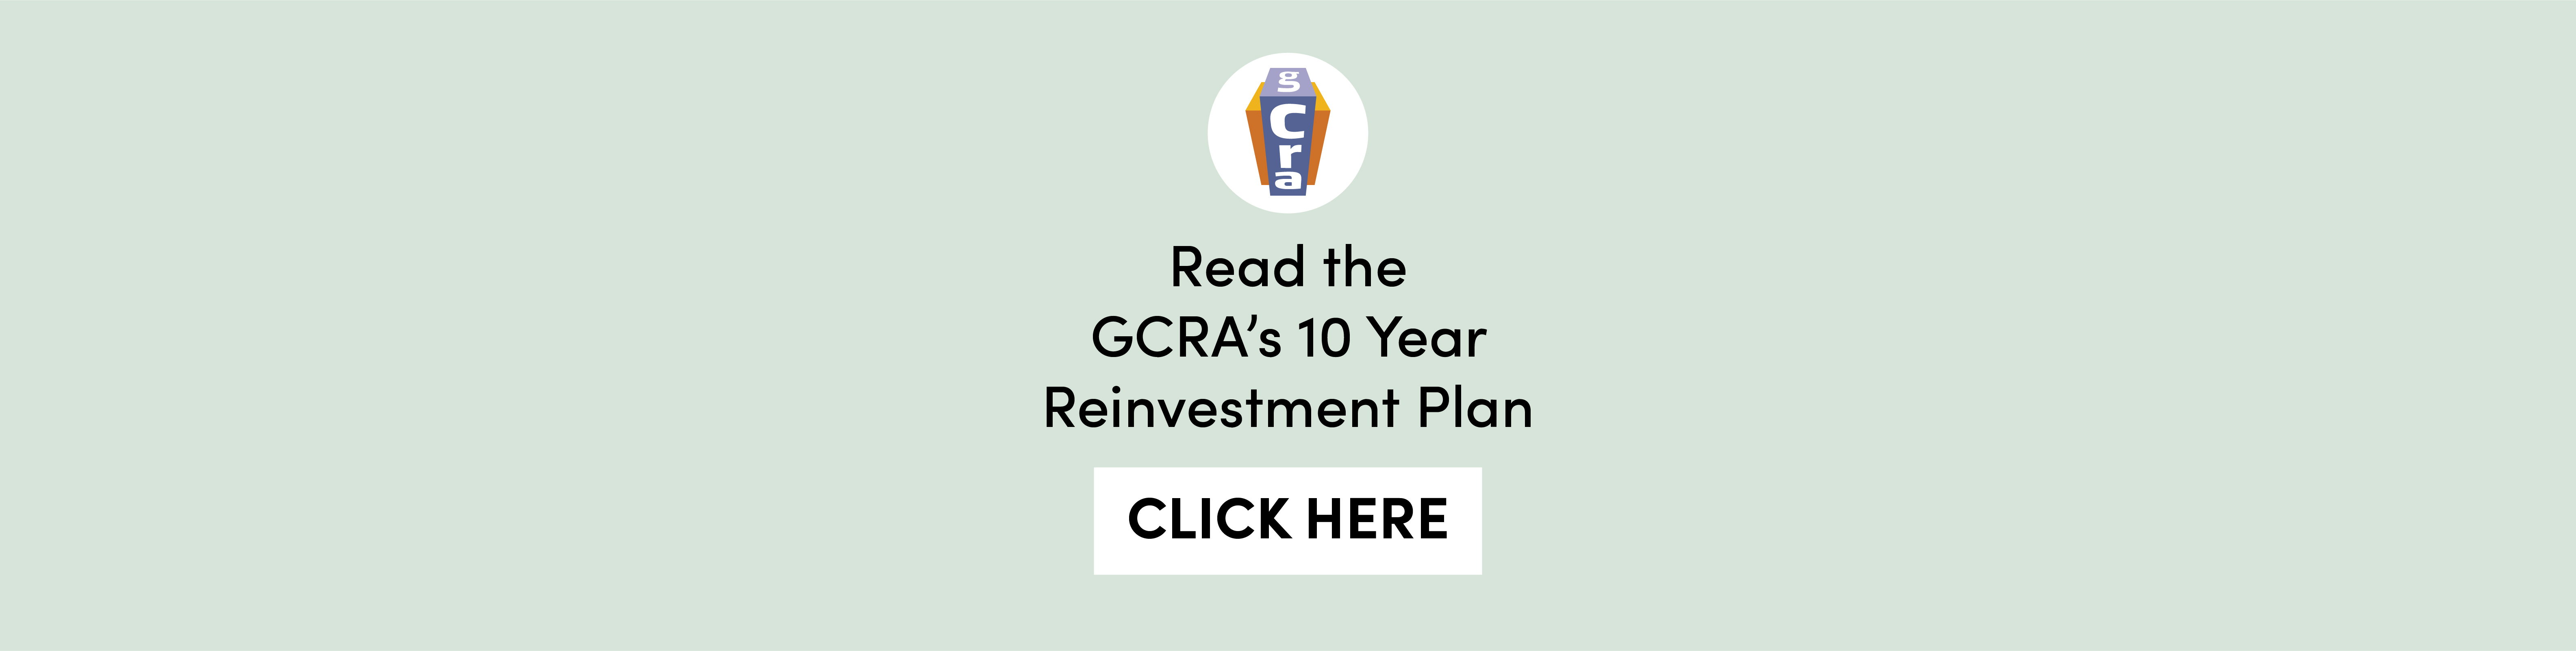 graphic with text: Read the GCRA's 10 Year Reinvestment Plan